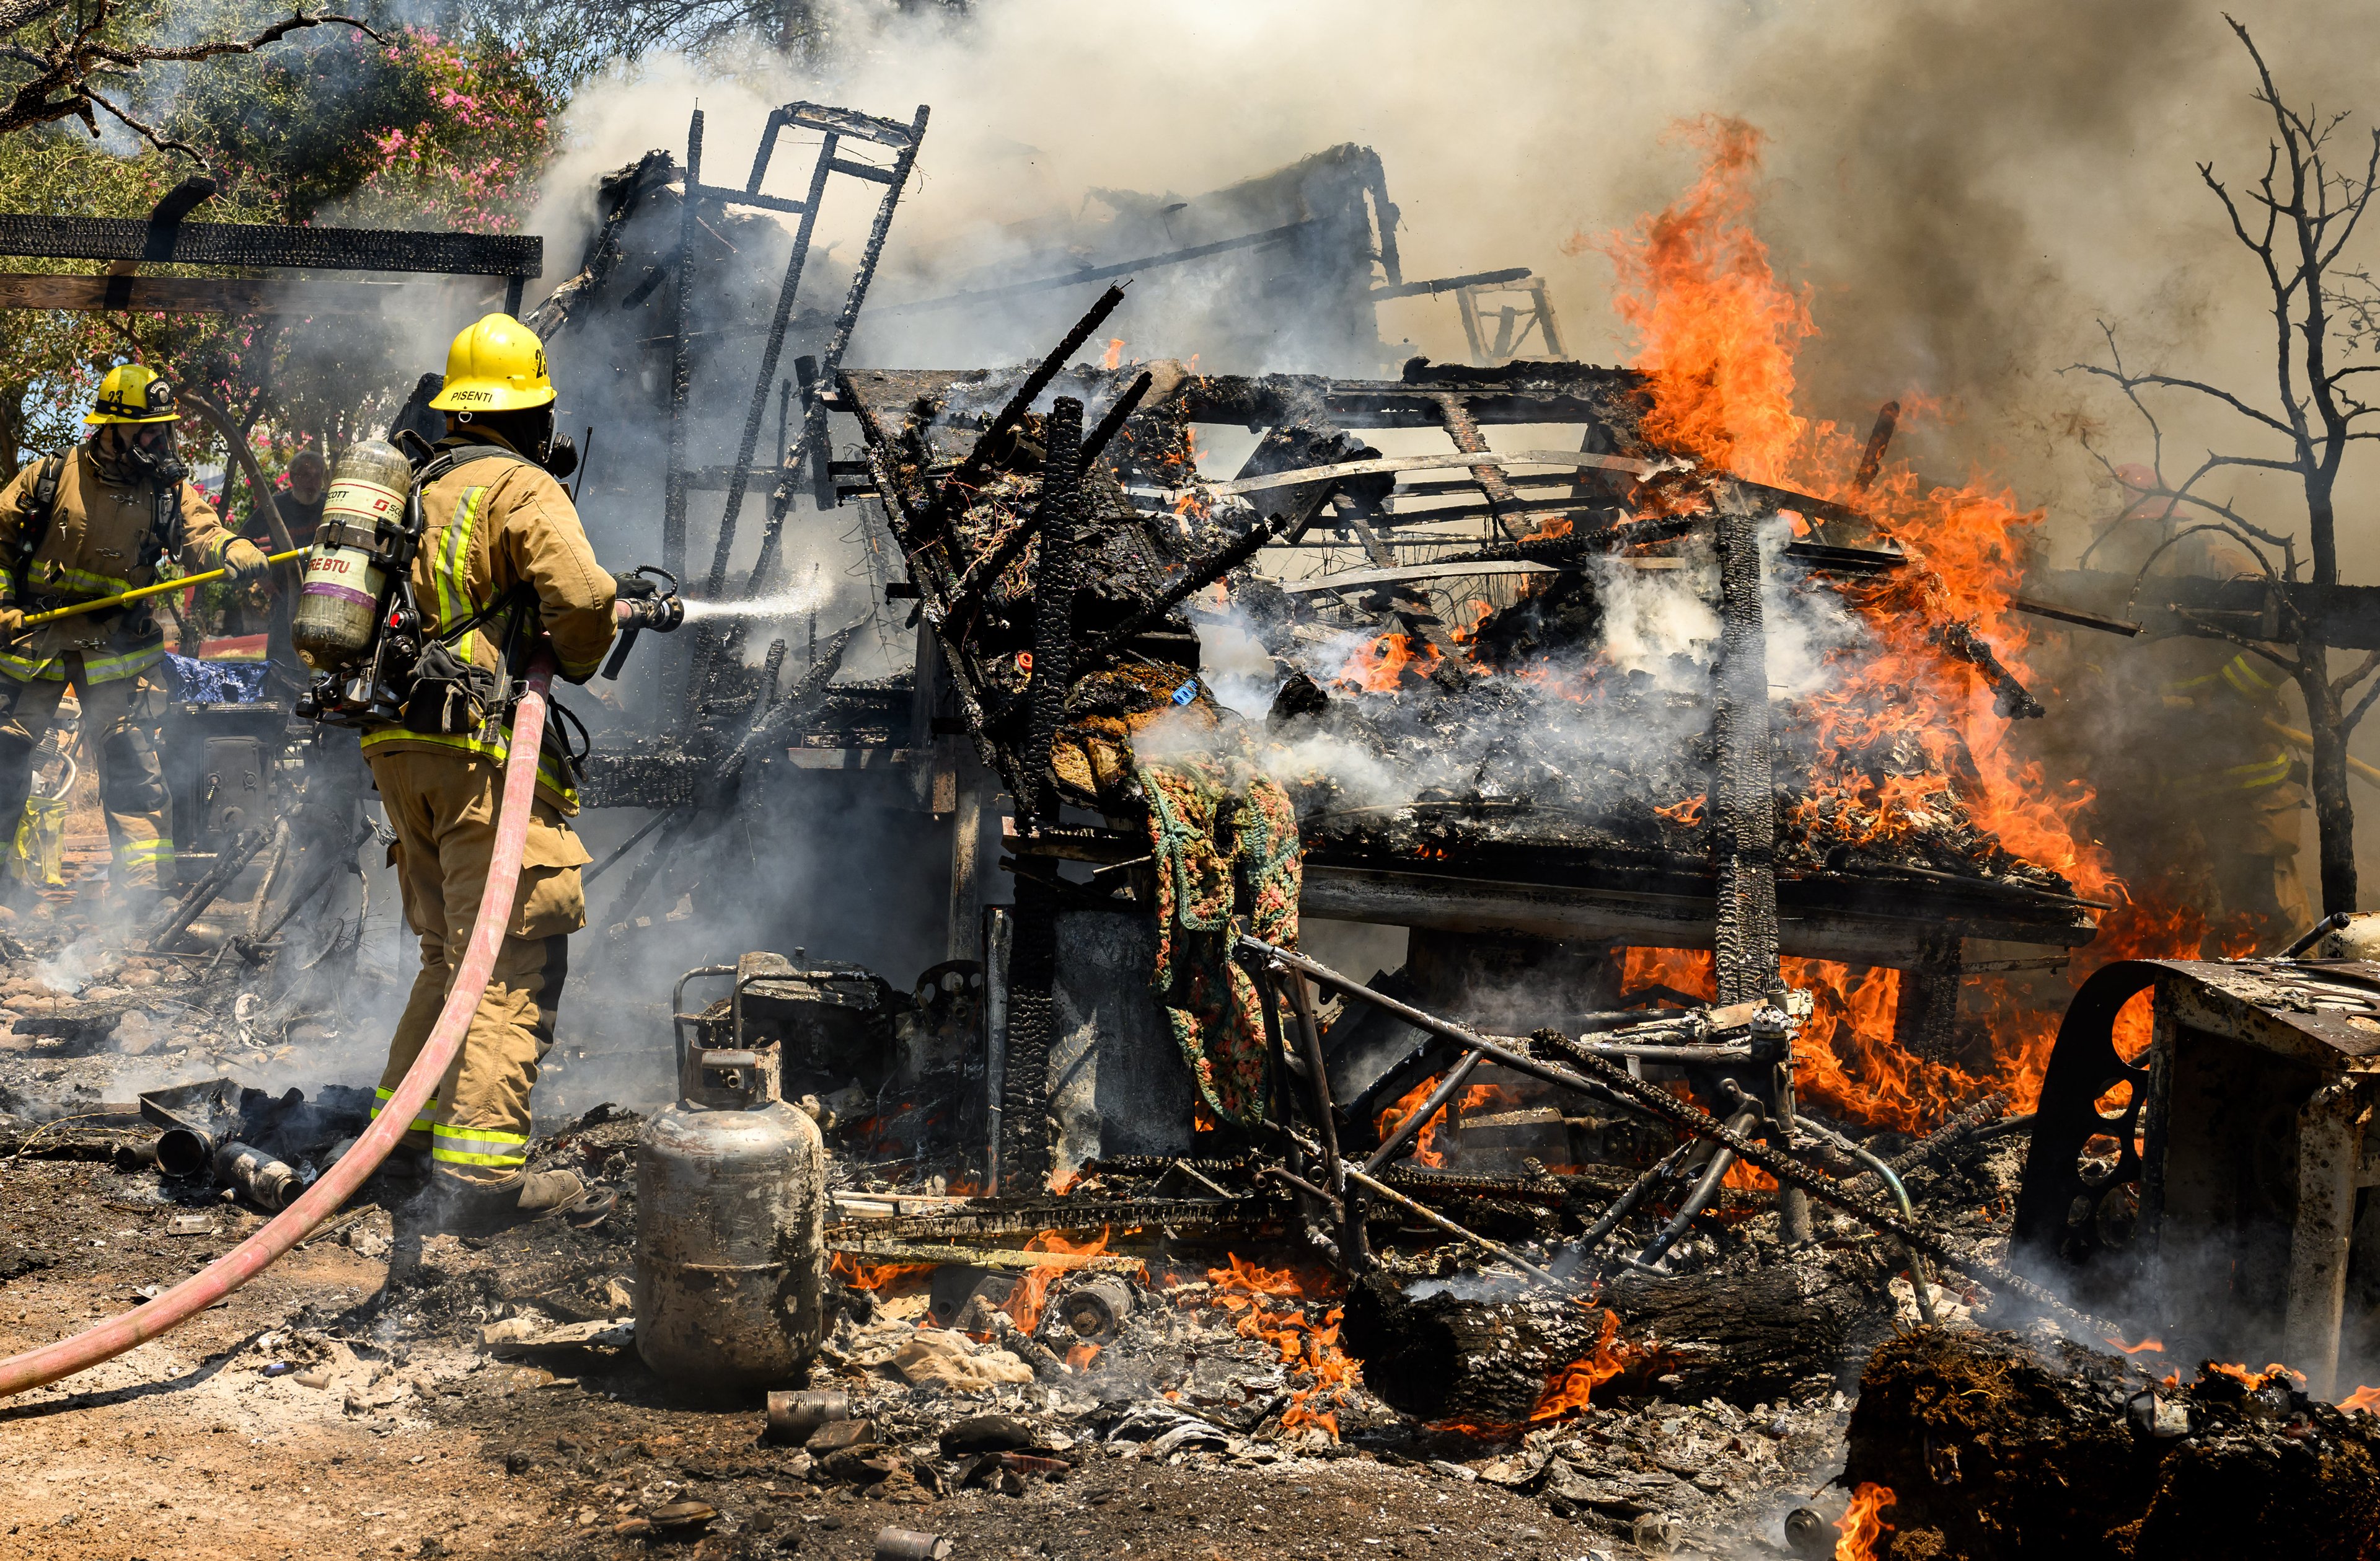 Firefighters knock down a structure fire that ignited from a burning generator and briefly spread to a small spot fire at a home during the Thompson fire in Oroville, California on July 3, 2024. A heatwave is sending temperatures soaring resulting in red flag fire warnings throughout the state. (Photo by JOSH EDELSON / AFP)